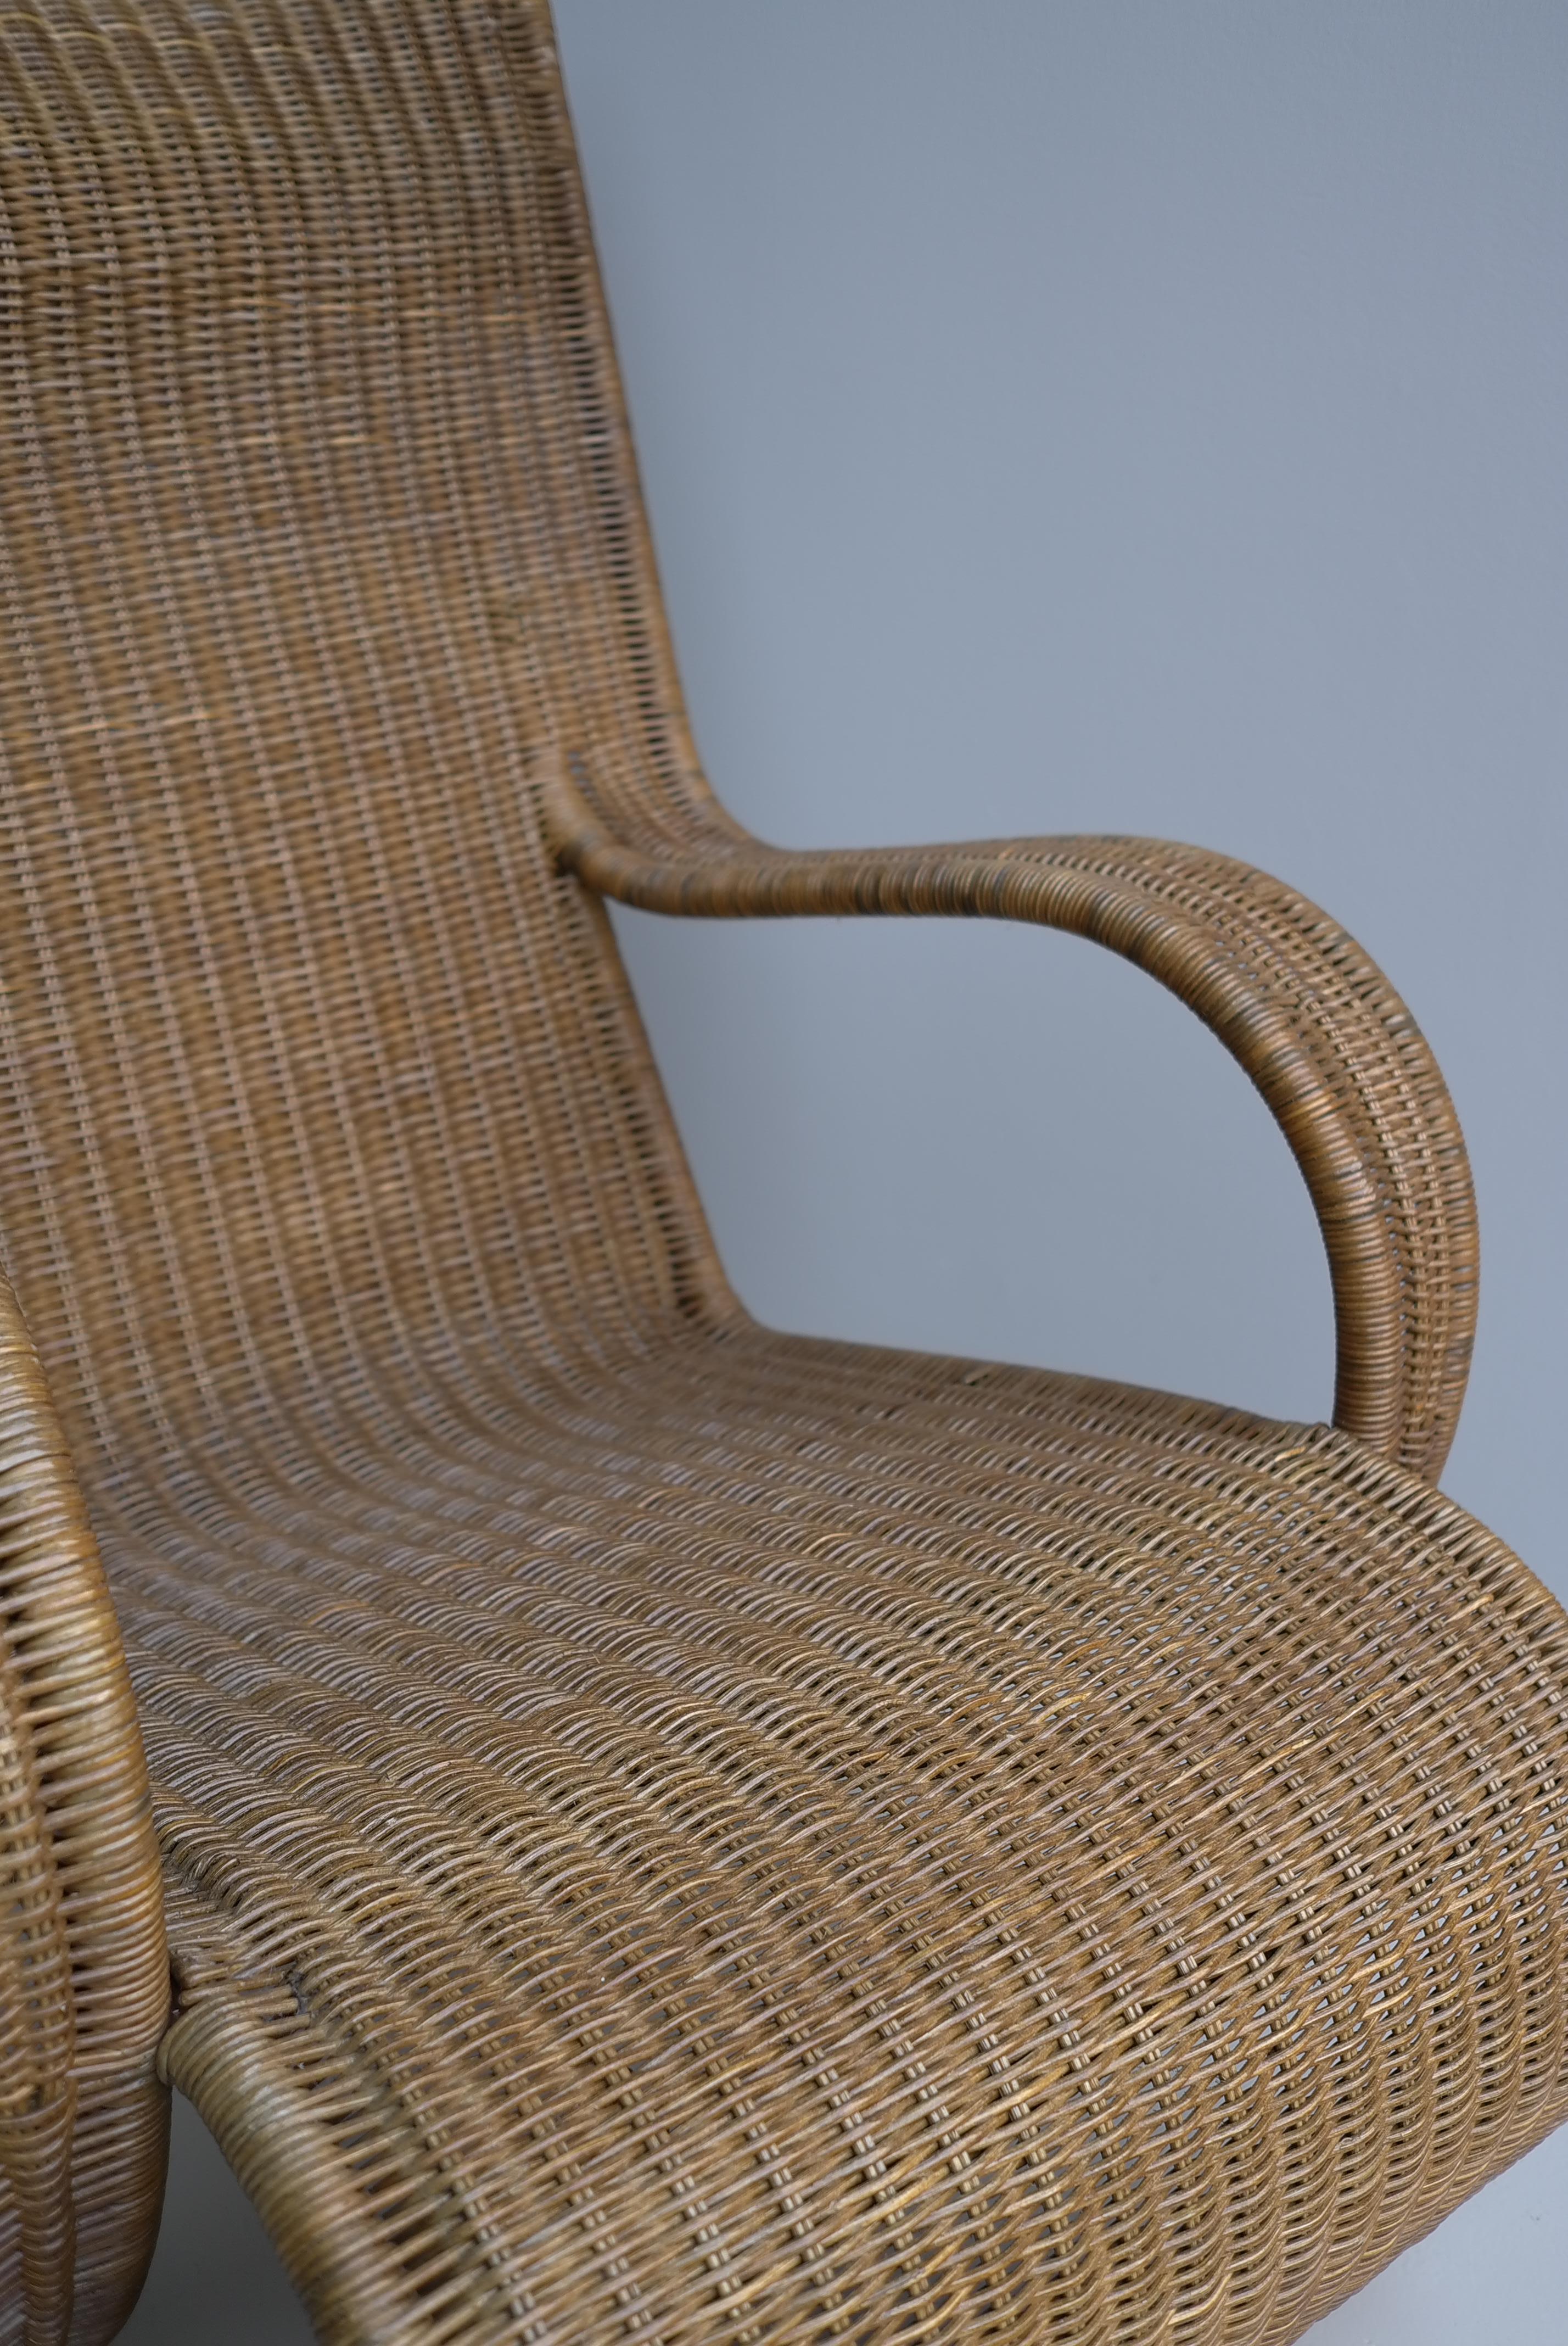 Large Sculptural Wicker Lounge Chair, France circa 1970 For Sale 3